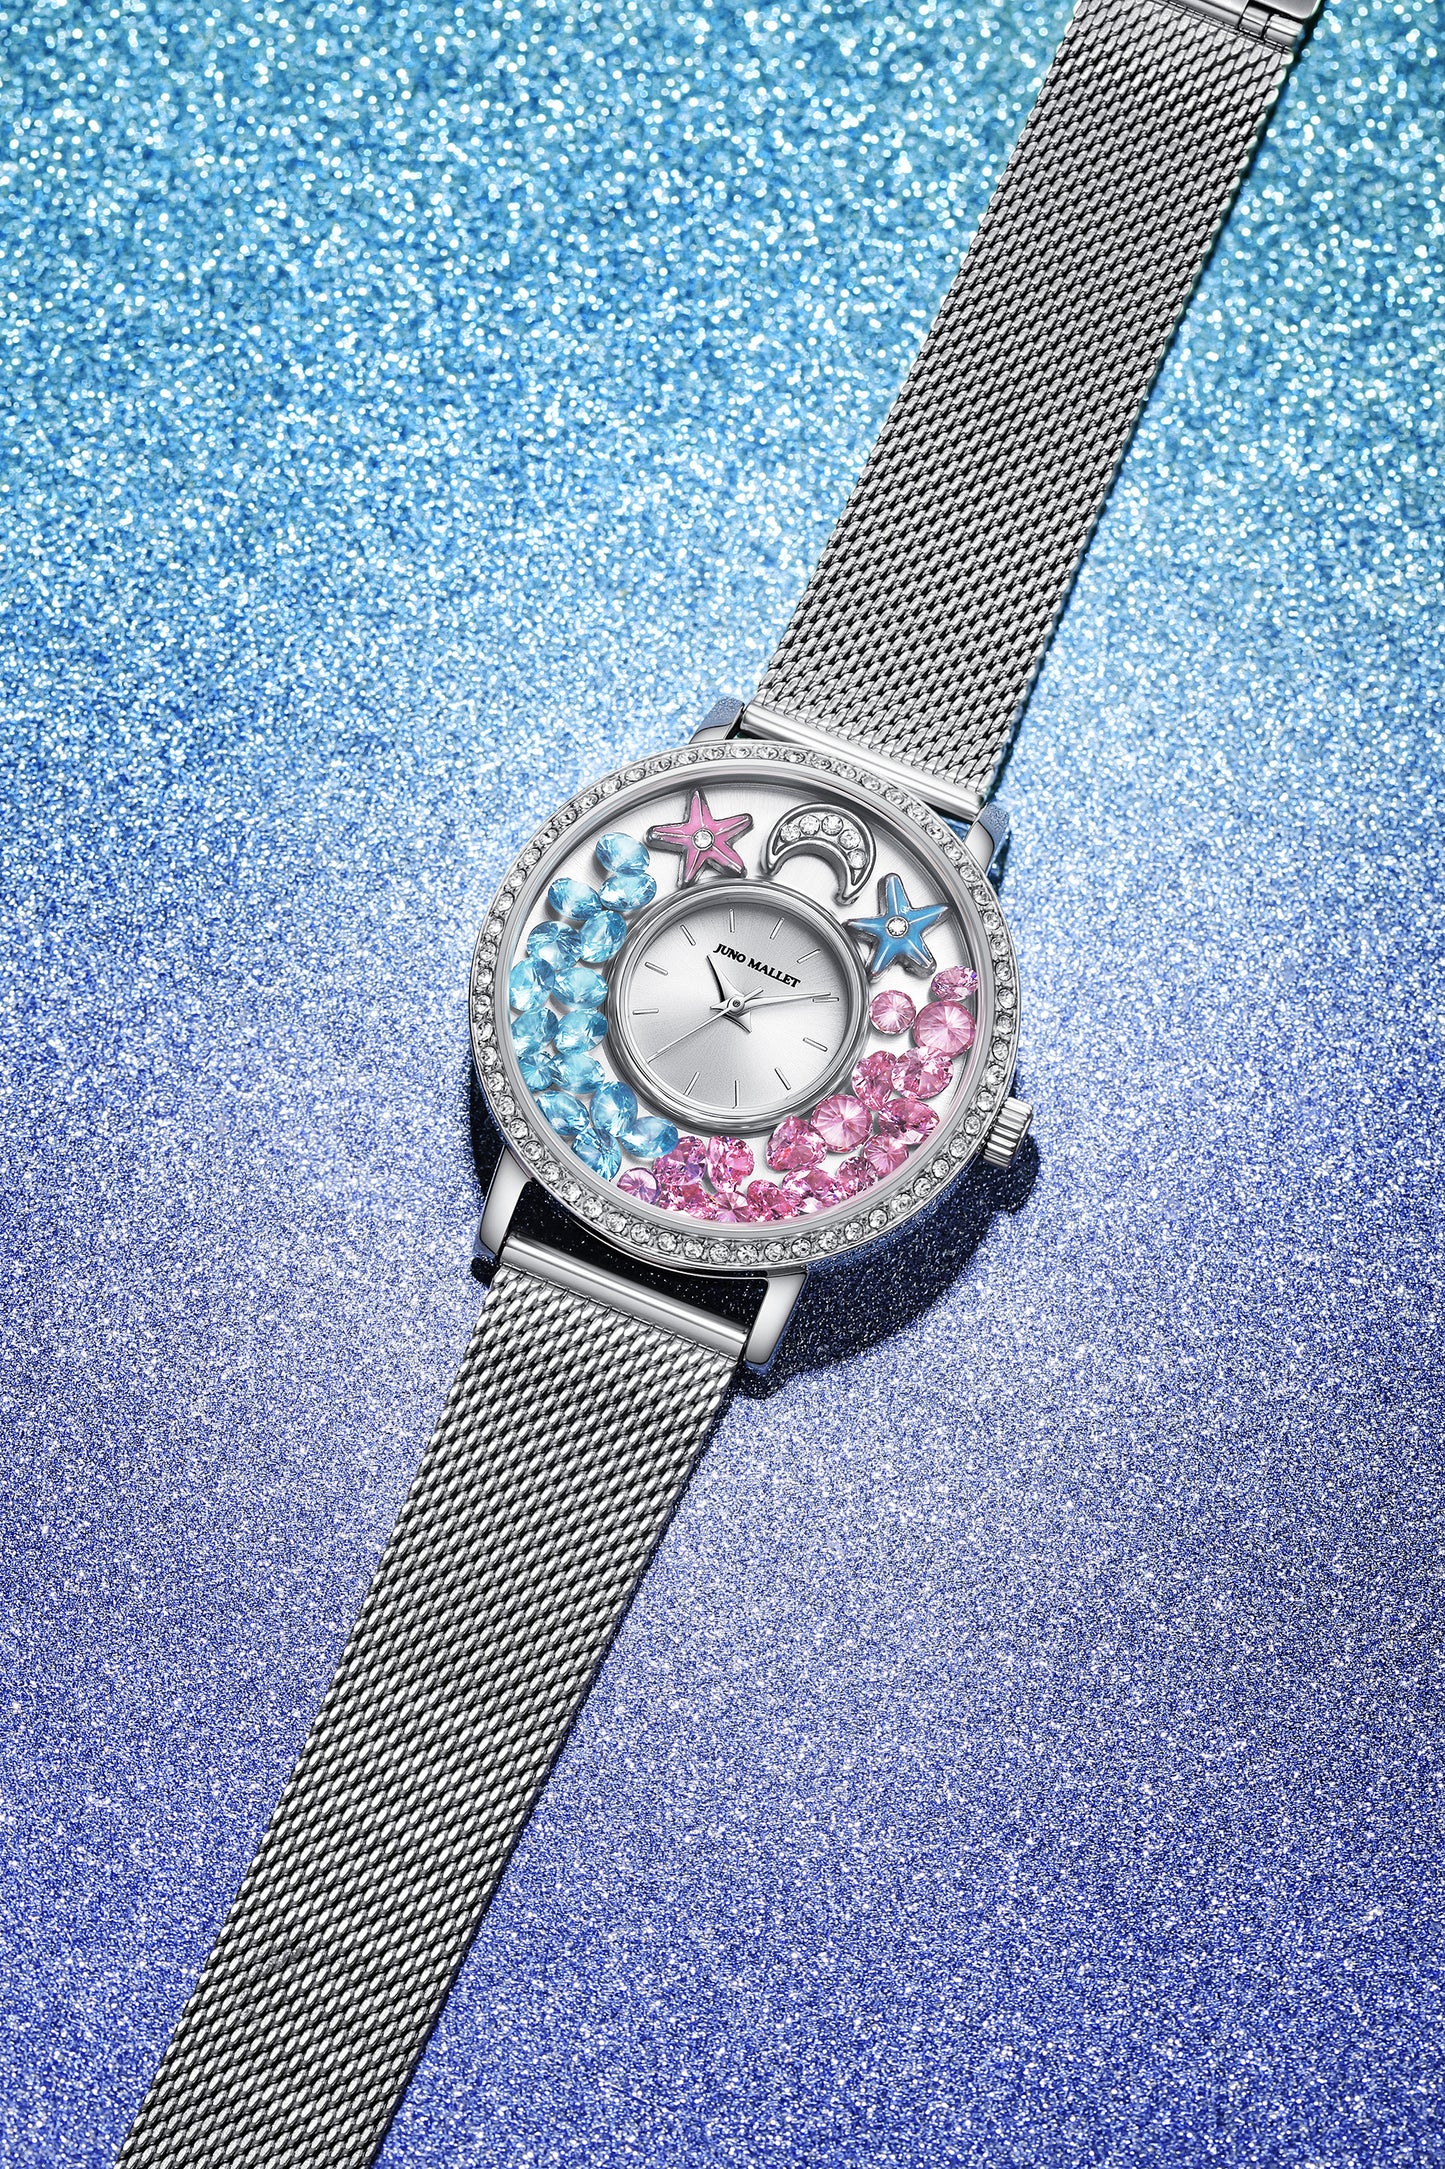 Crystal Lively Locket Watch | Silver Minimalist Watch with DIY Charms | Floating Stars